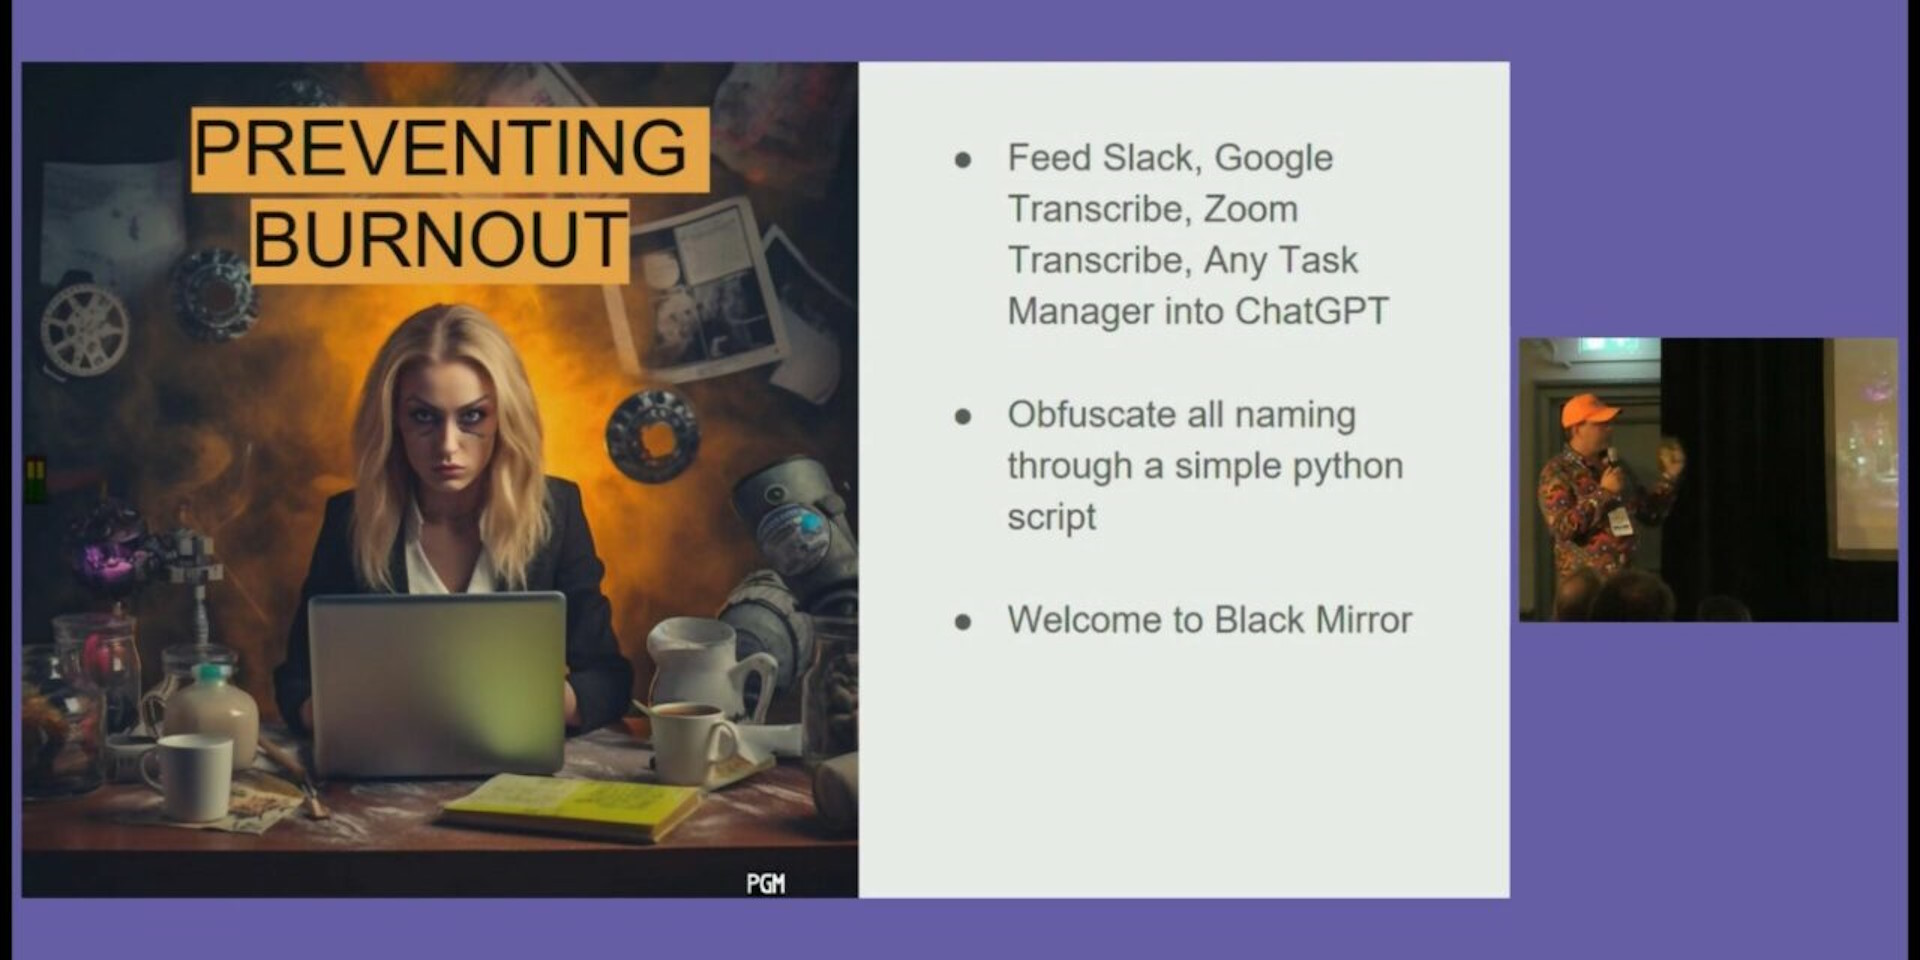 Feed Slack, Google Transcribe, Zoom Transcribe, Any Task Manager into ChatGPT – Obfuscate all naming through a simple python script – Welcome to Black Mirror